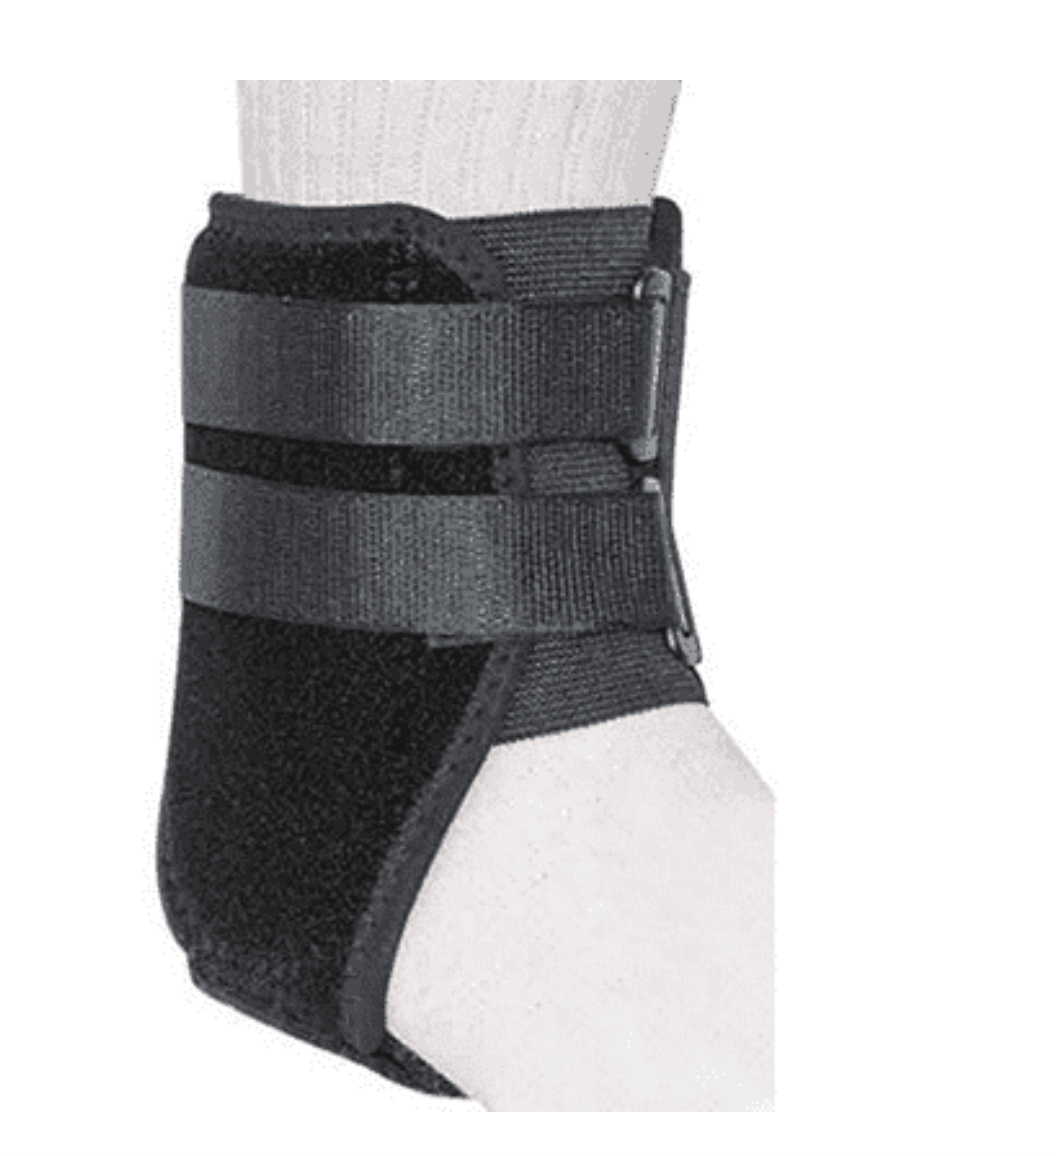 Ankle Brace Support One MD191R